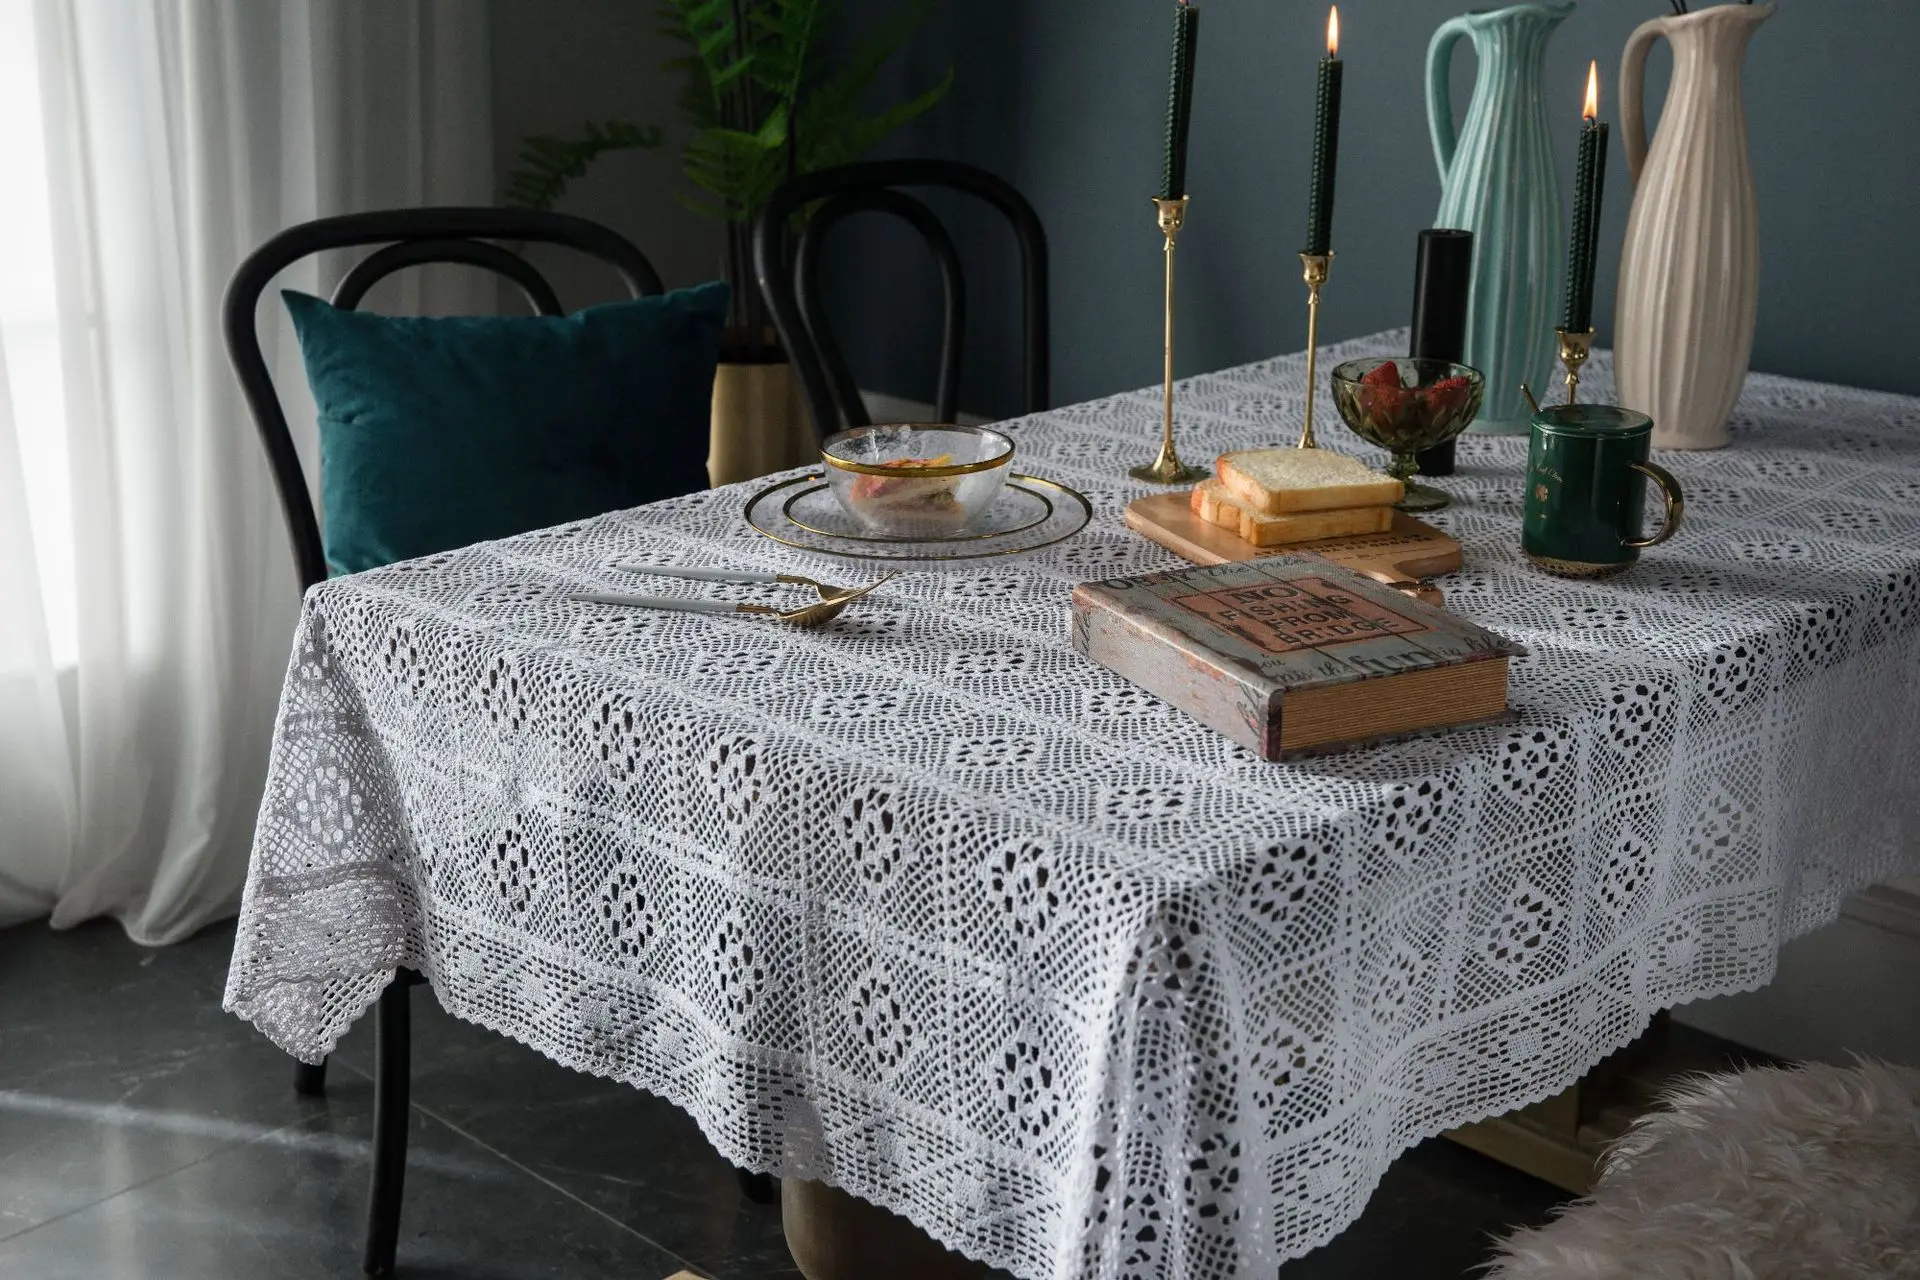 White Hollow Decorative Table Cloth Tablecloth Rectangular Tablecloths Dining Table Cover Obrus Tafelkleed mantel mesa nappe